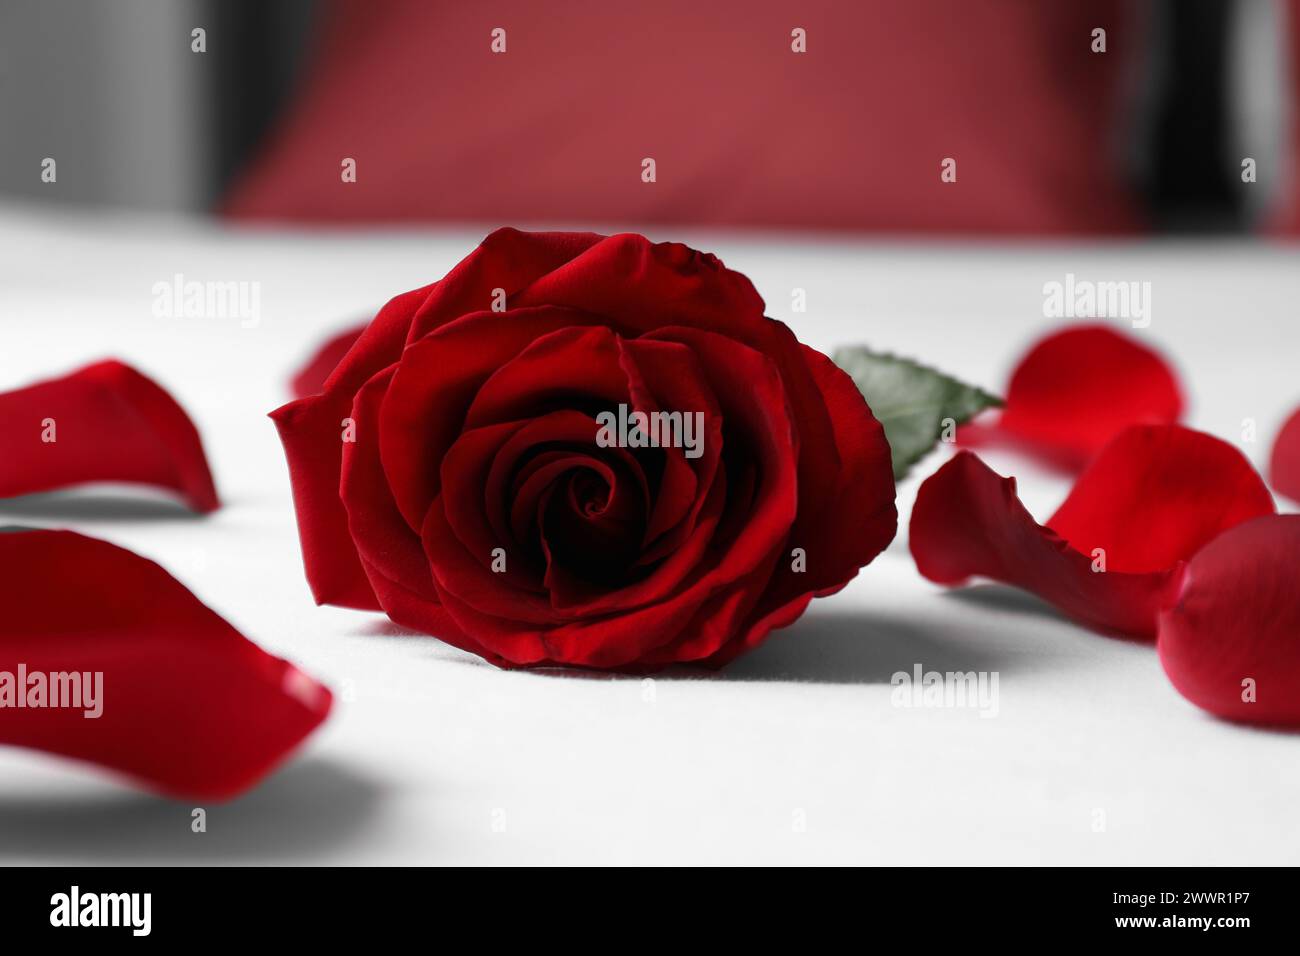 Honeymoon. Red rose and petals on bed, closeup Stock Photo